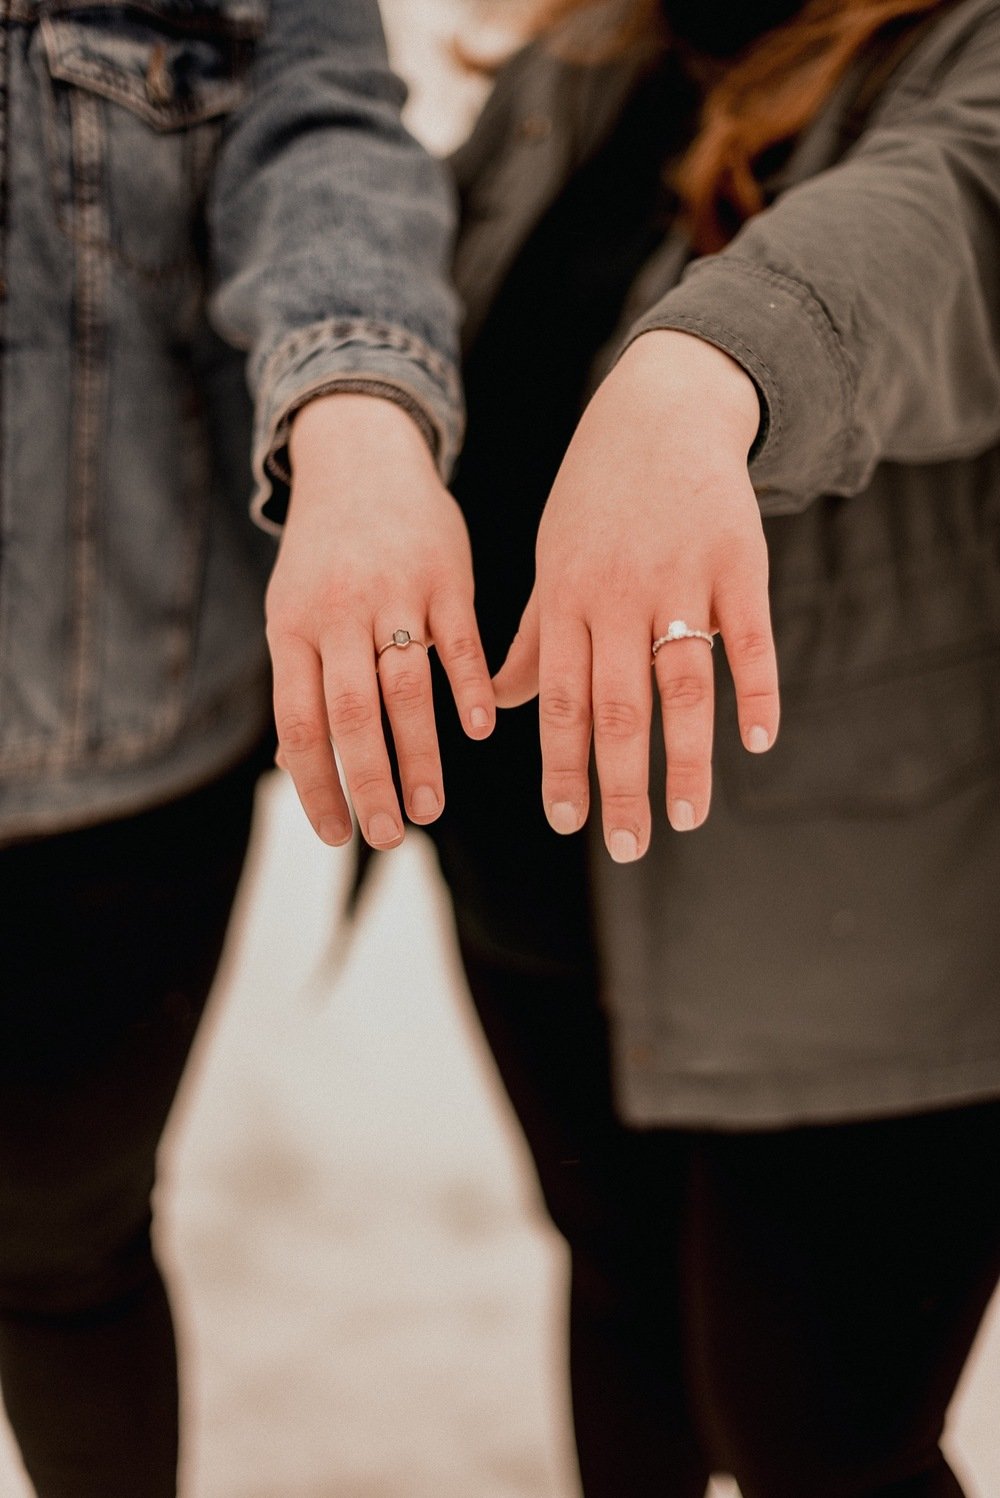 Couple-shows-off-their-rings-after-they-proposed-to-each-othe.jpg.jpg